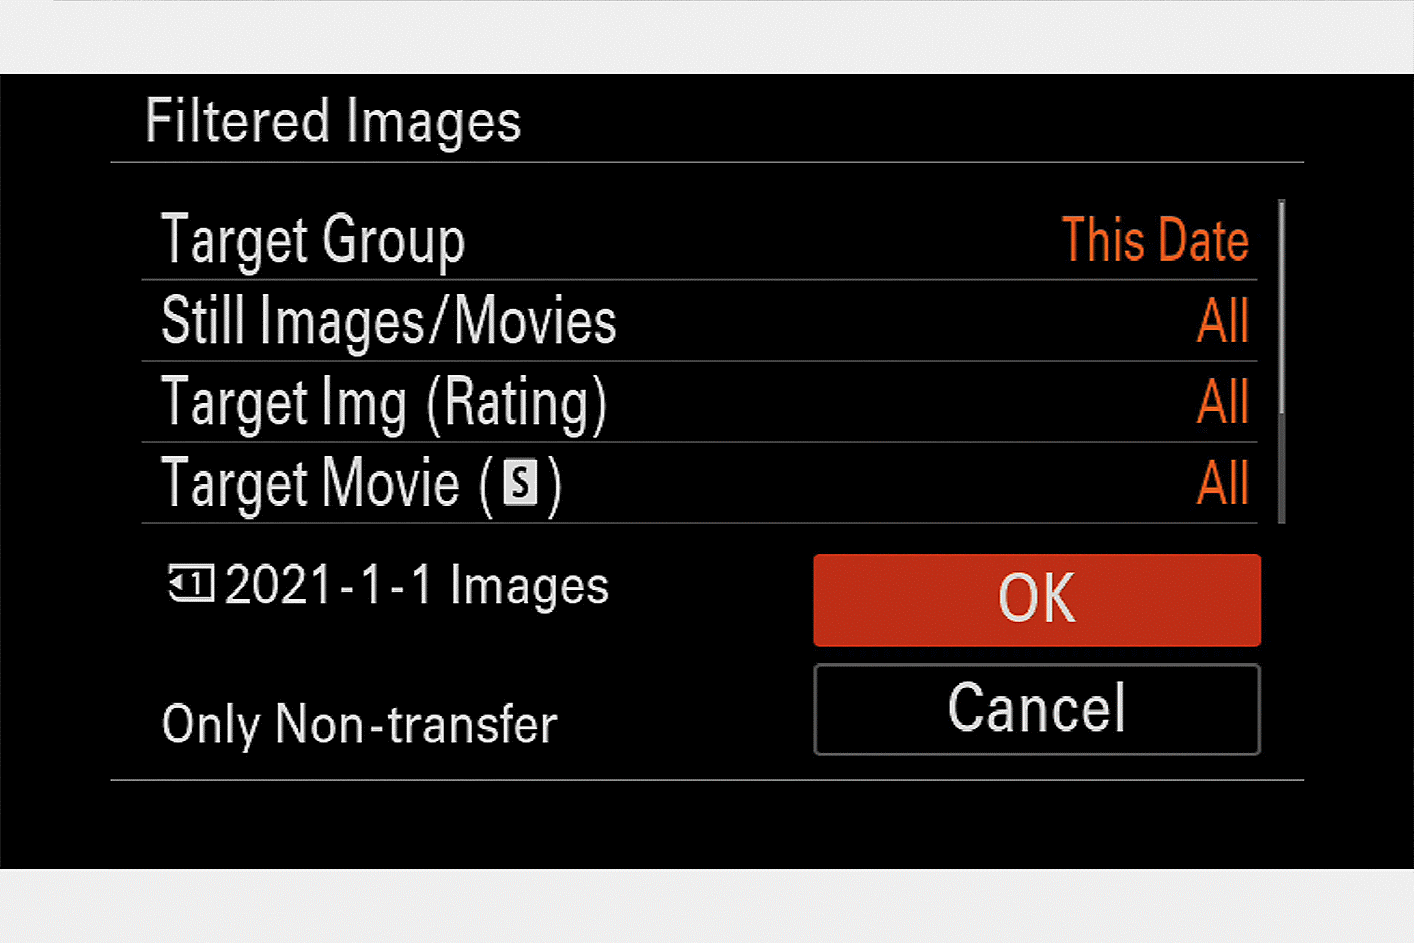 The menu display for selection of images to be transferred